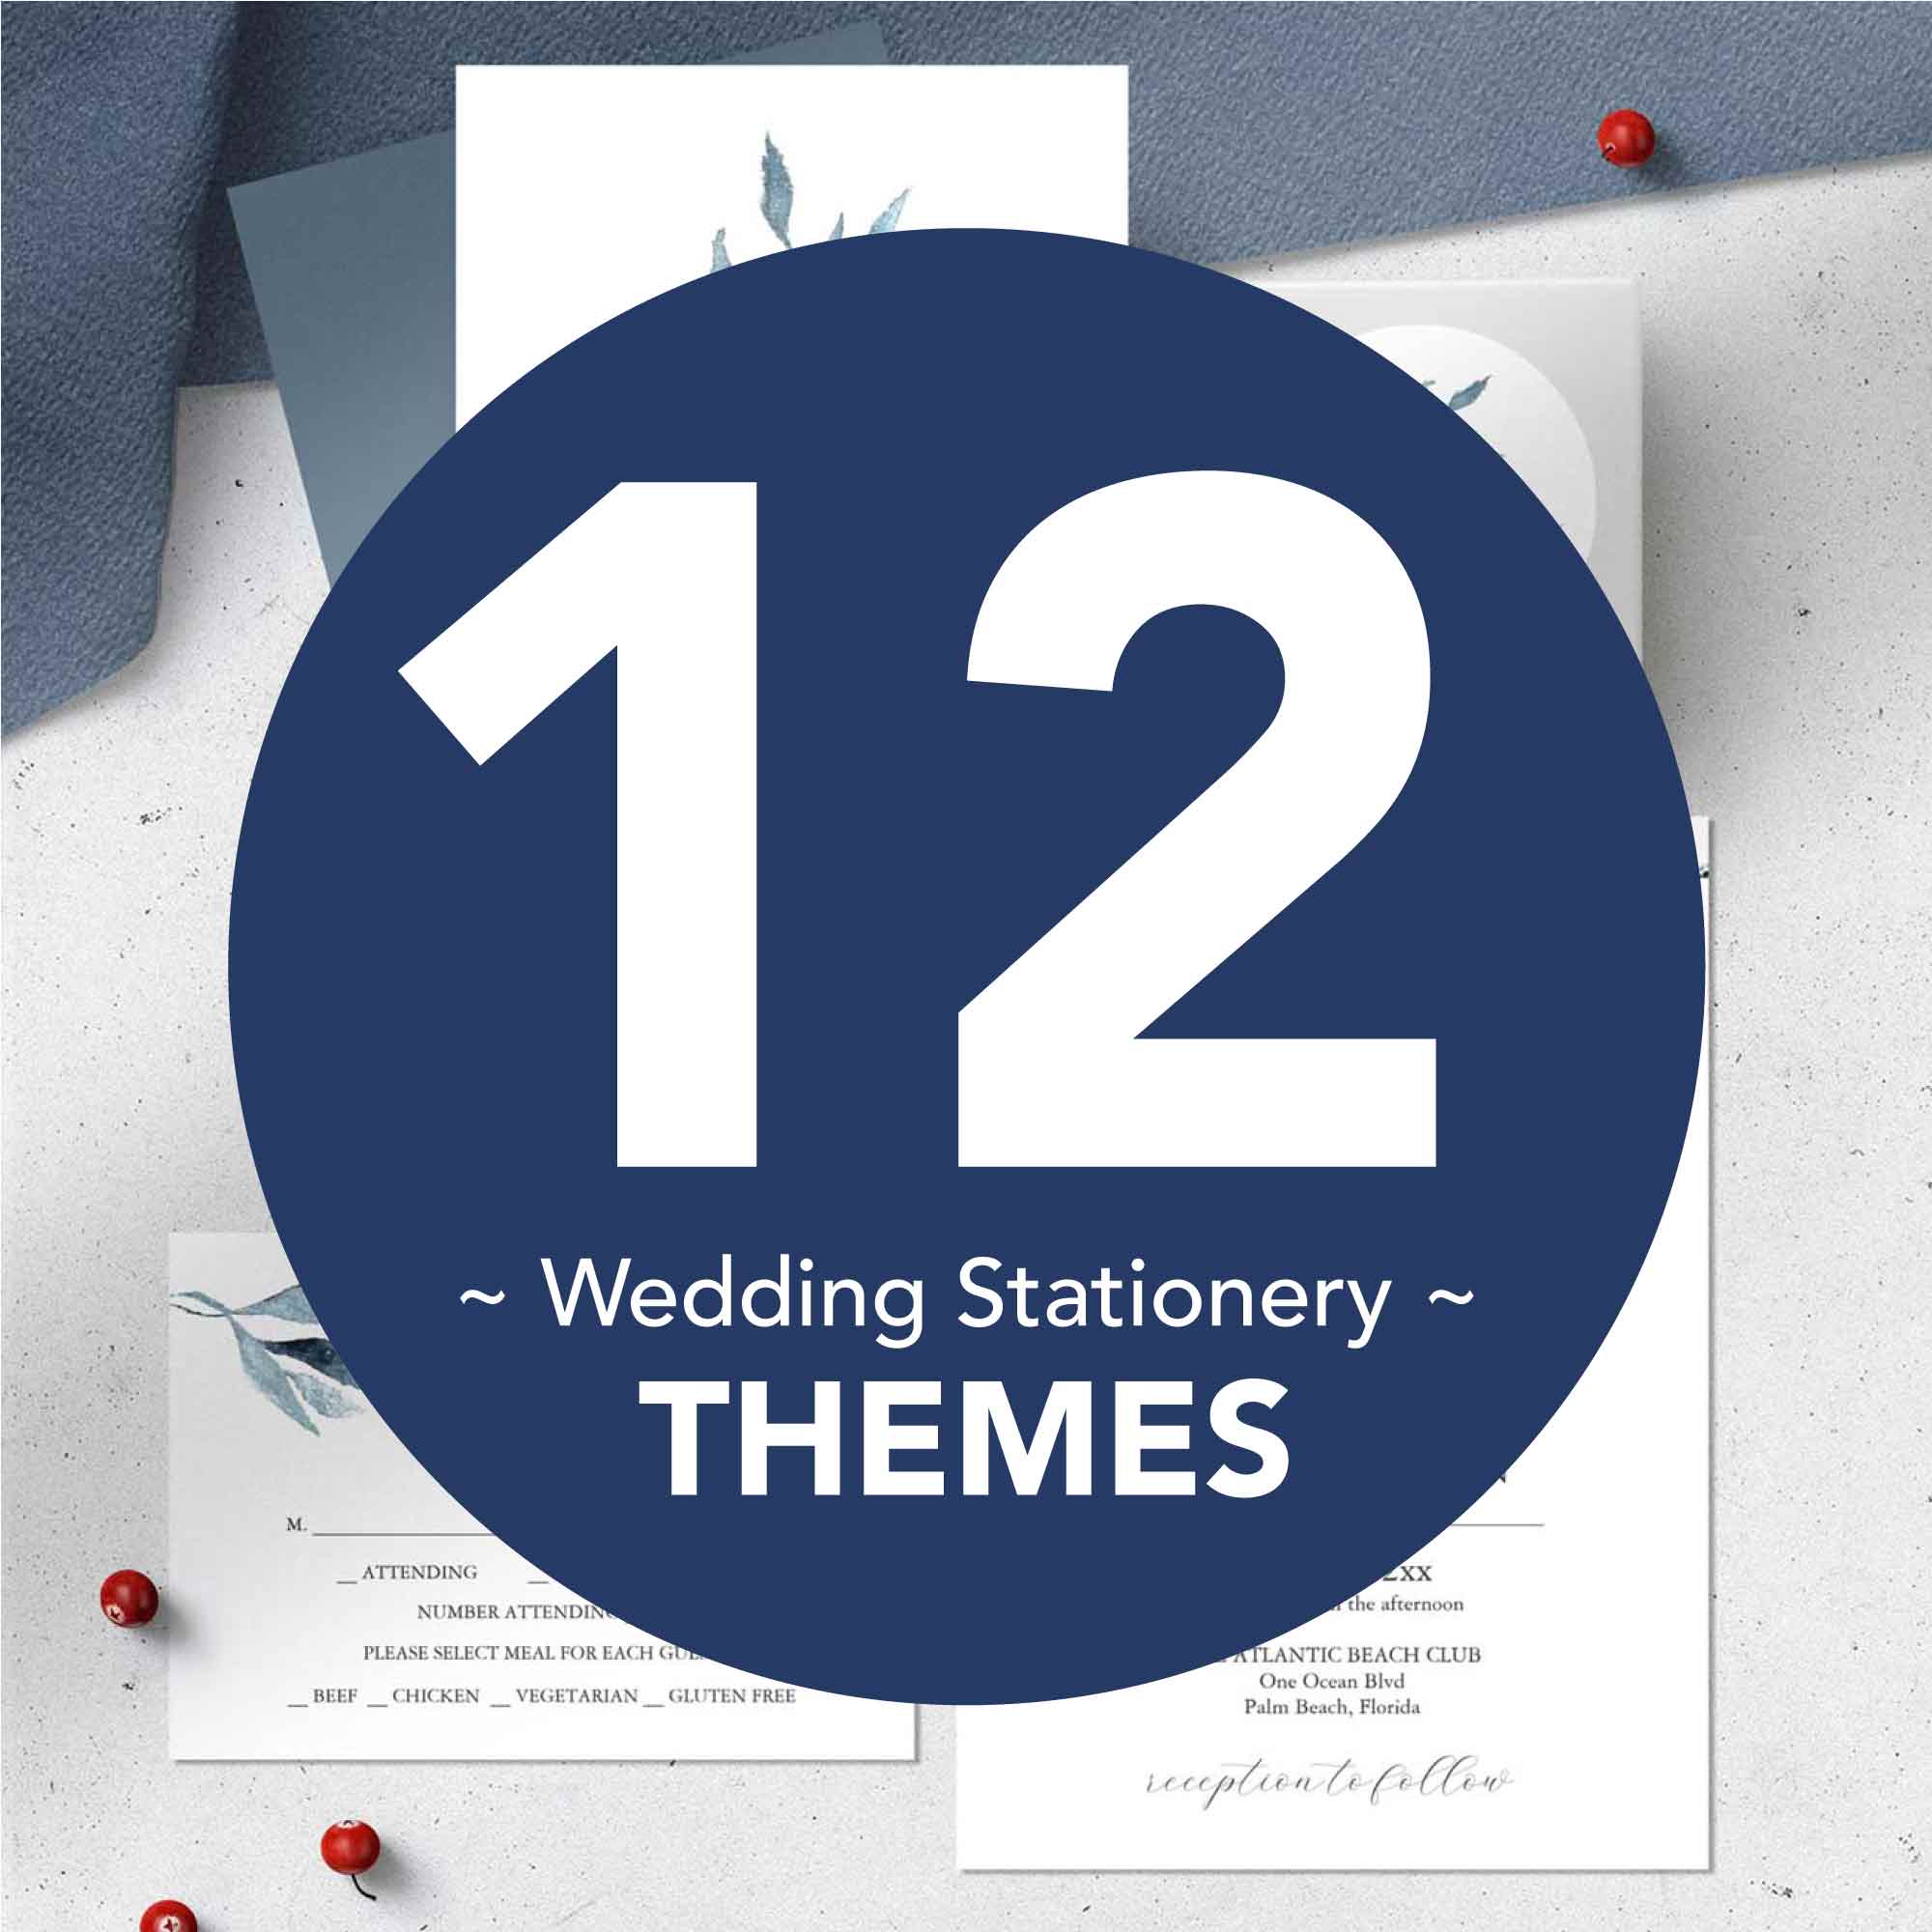 The top 12 wedding stationery themes for 2024. Click to see them all.